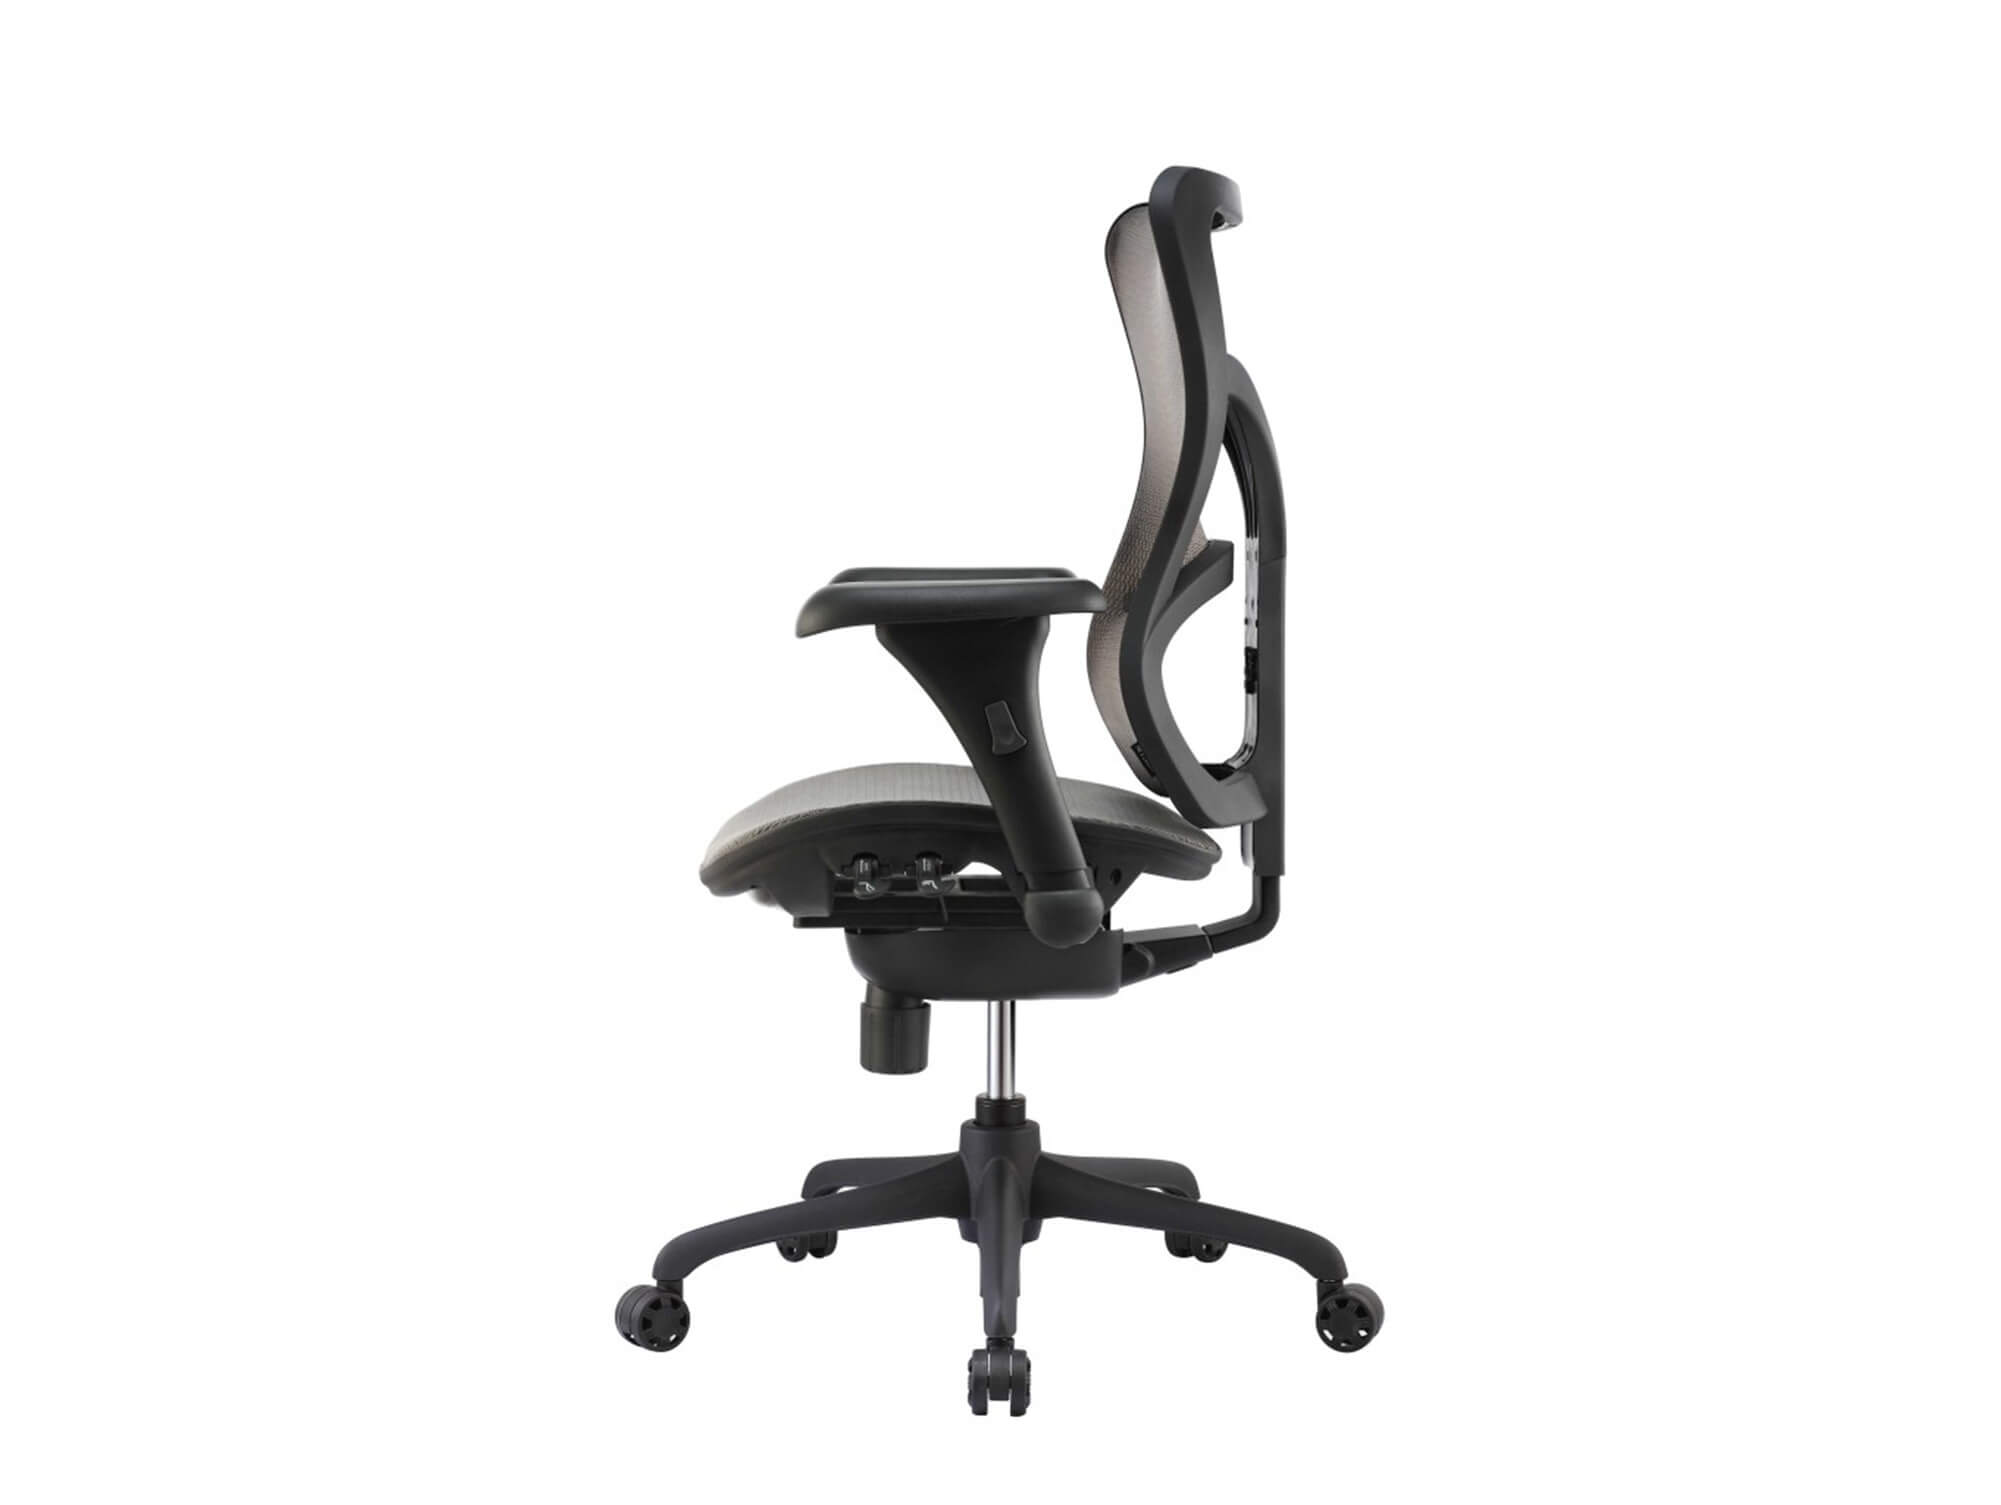 Adjustable office chair side